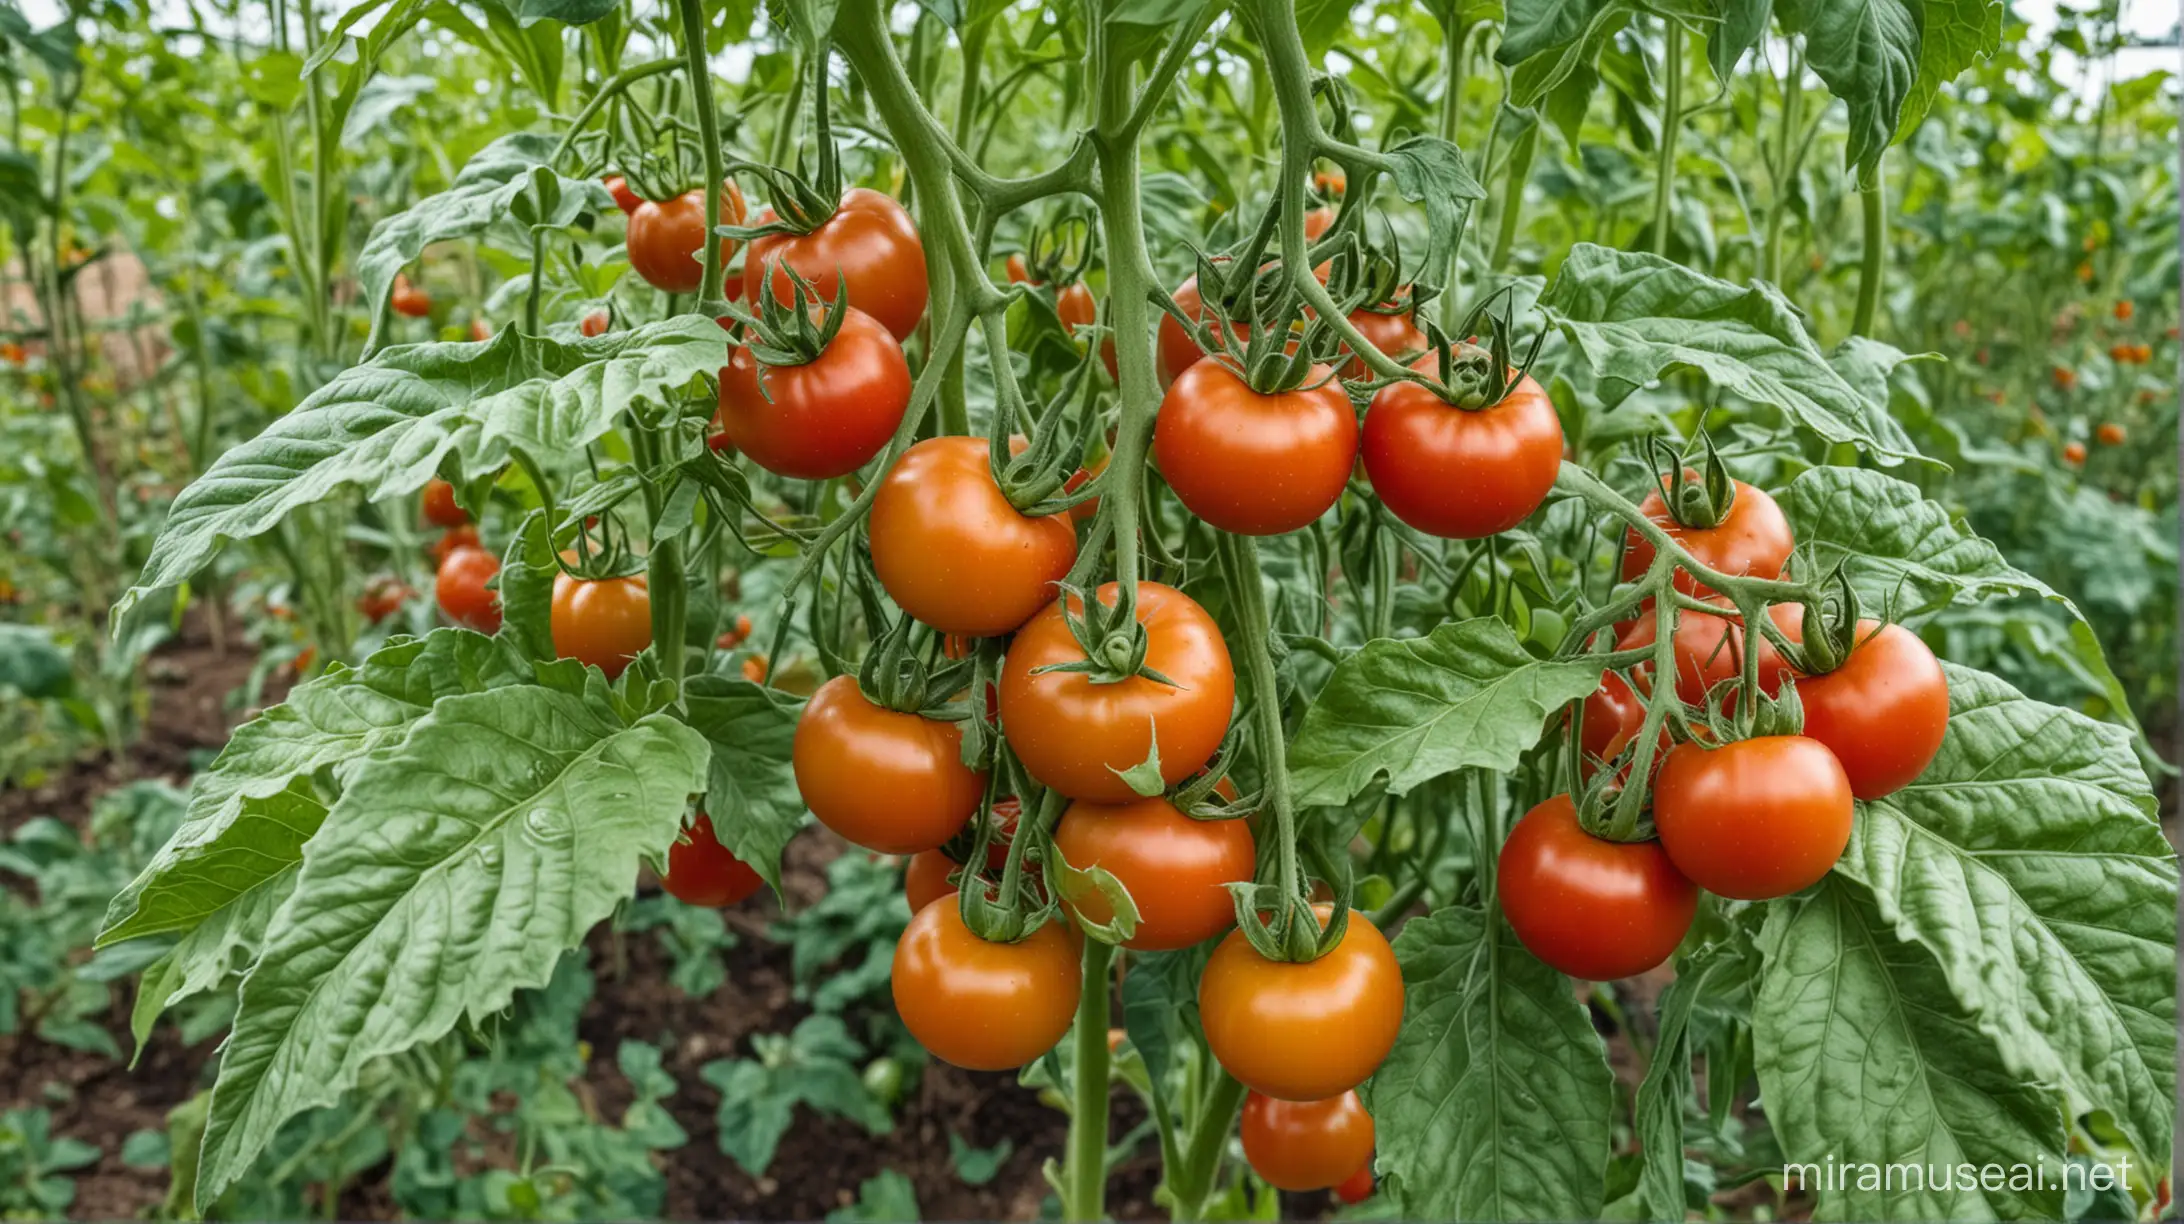 Real Image of Prosperous Deficiency in Tomato Leaf with tomatoes in the bunch